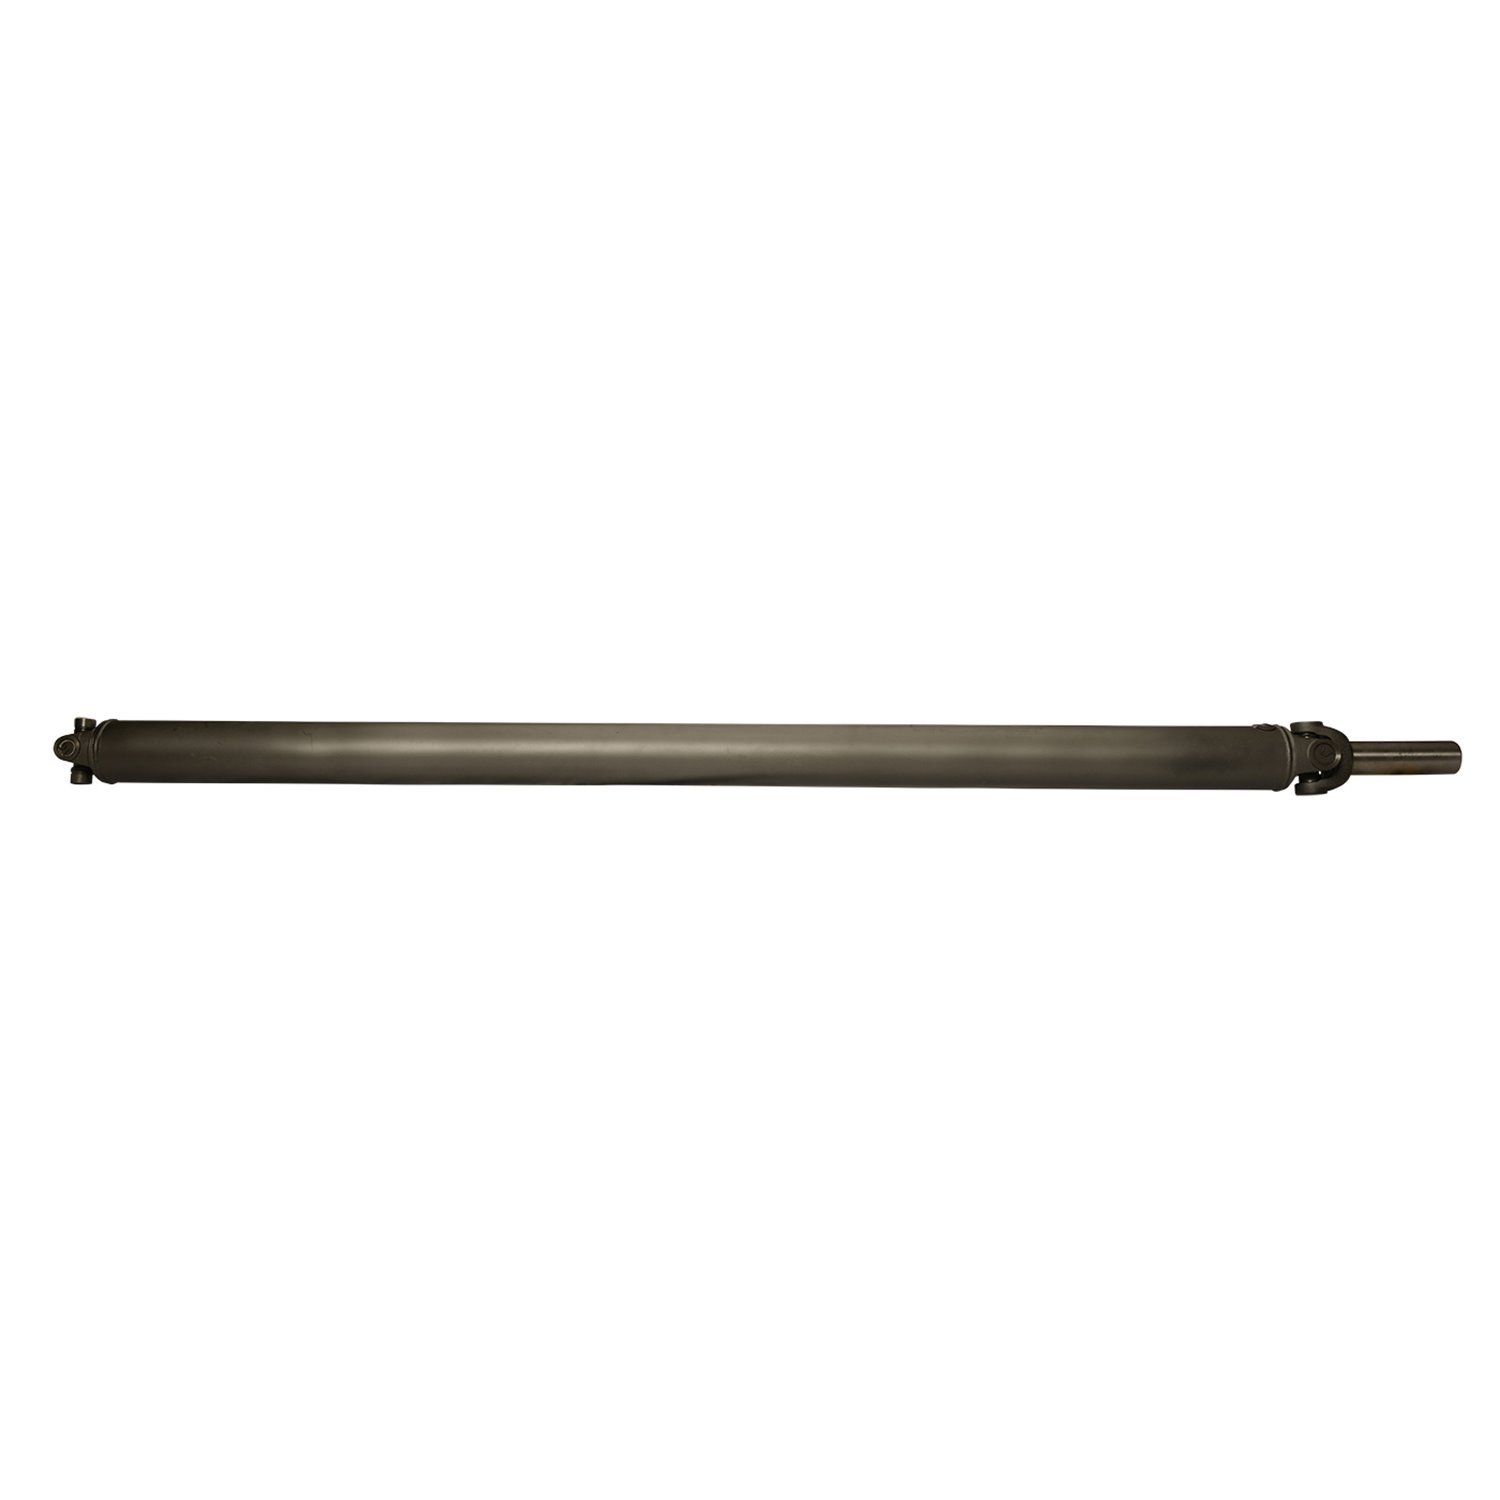 USA Standard ZDS9708 Rear Driveshaft, For Durango, 45-1/4 in. Center-To-Center